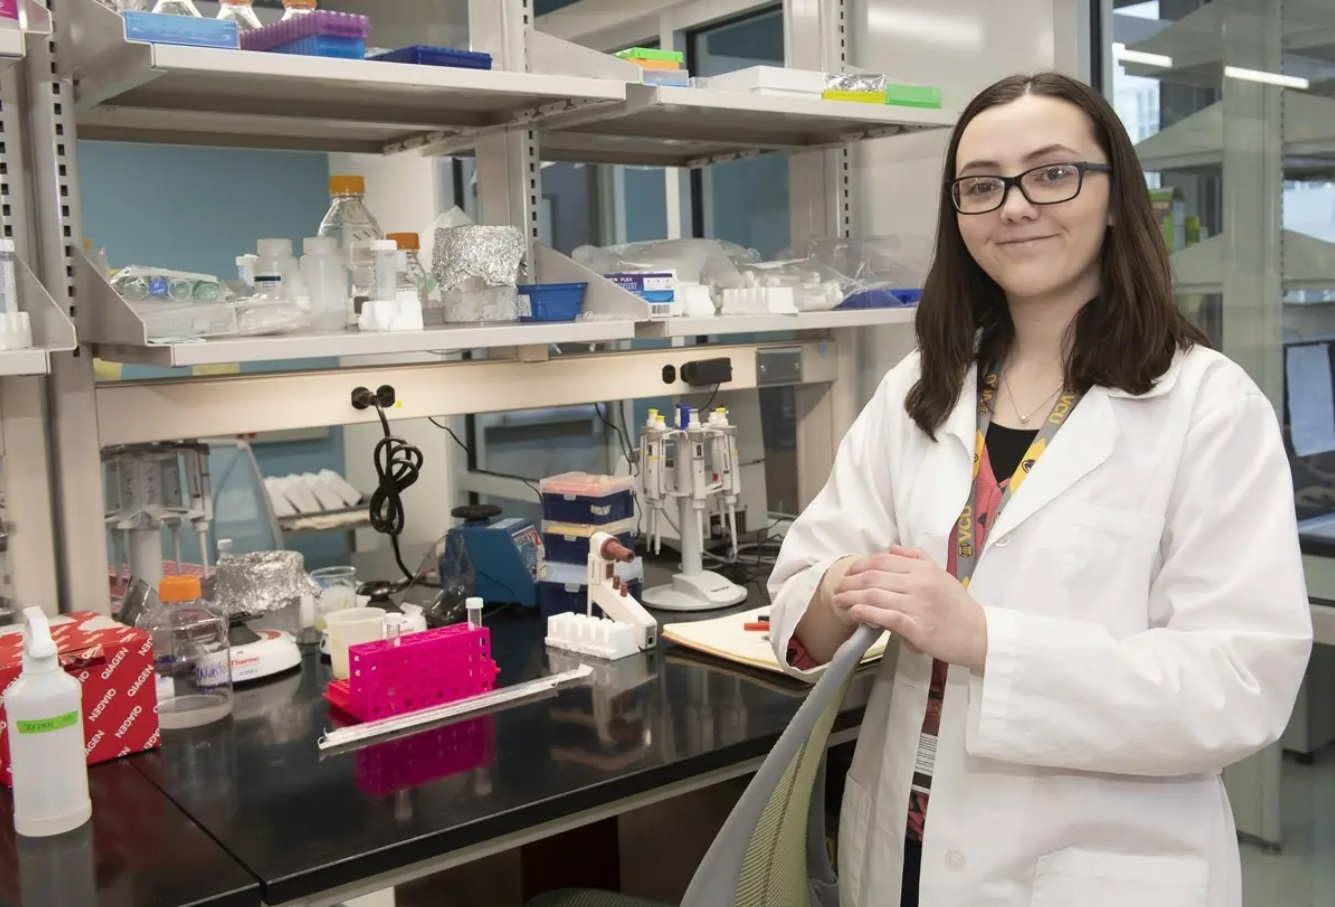 As a microbiology ambassador, Annie Hinson helps establish new student group and promotes science in the community